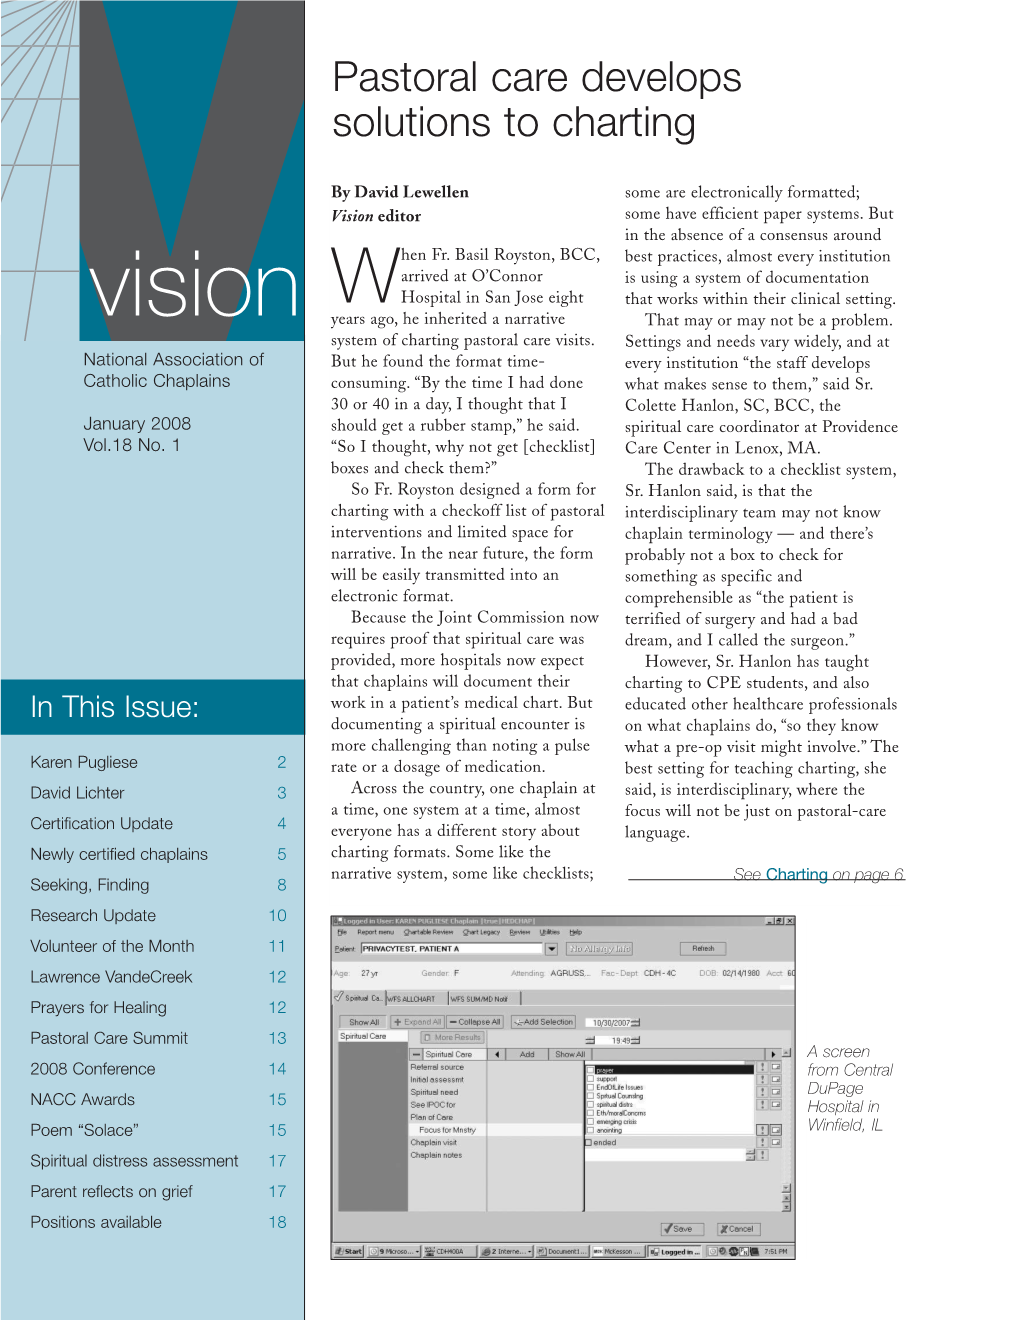 Vision Editor Some Have Efficient Paper Systems